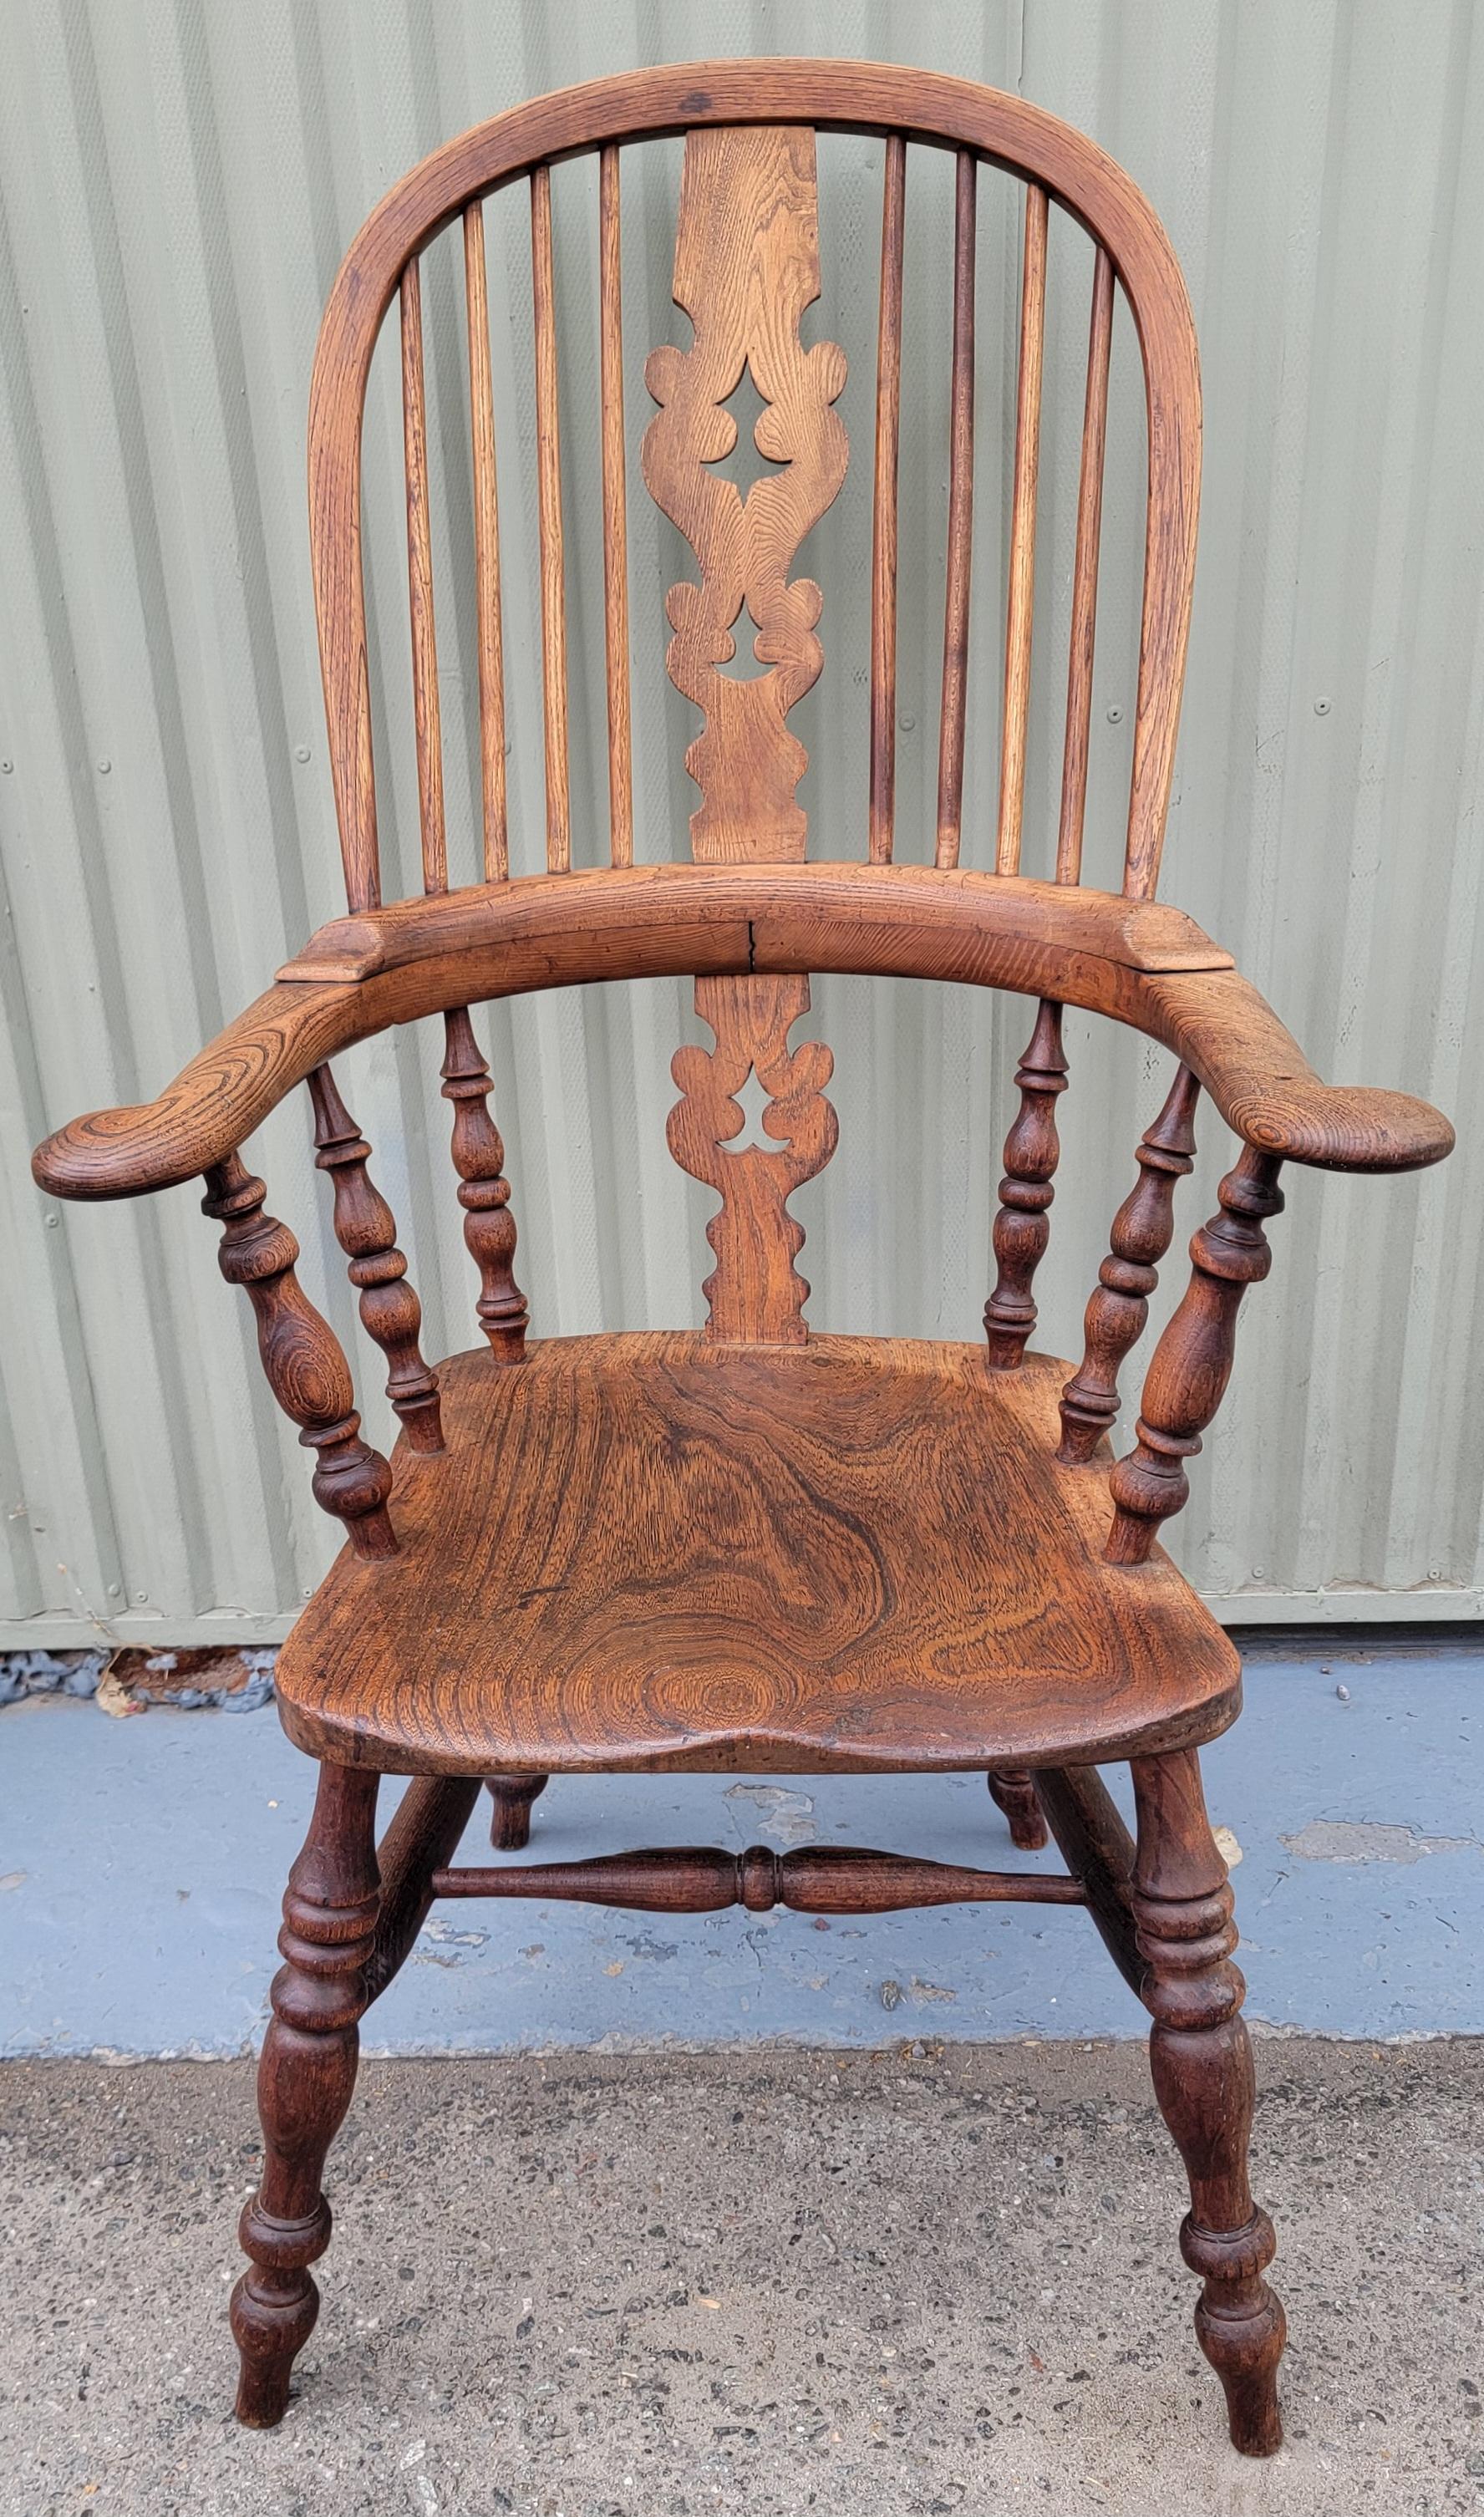 The arms on the slightly browner chair are 1.5 inches higher at 28 inches.These chairs are super comfortable and have a wonderful aged patina.